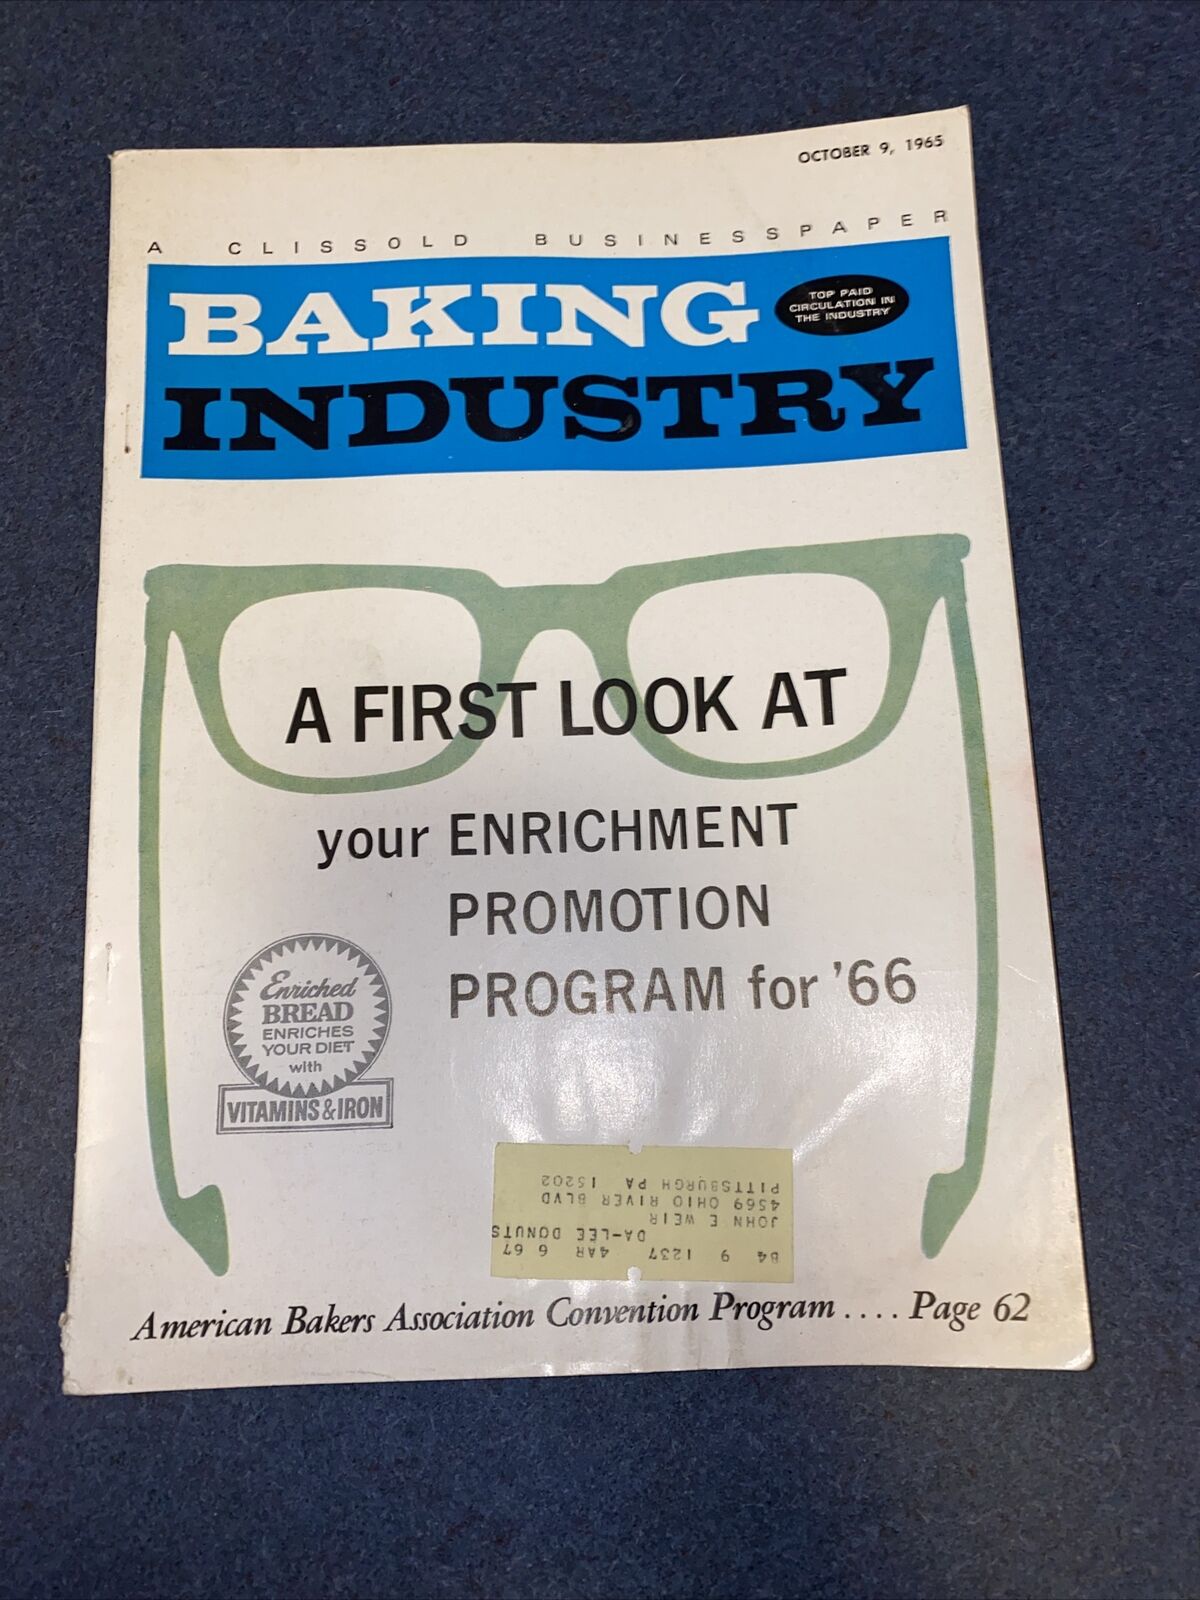 1965 October 9 BAKING INDUSTRY MAGAZINE w/ Trade Articles Ads Recipes